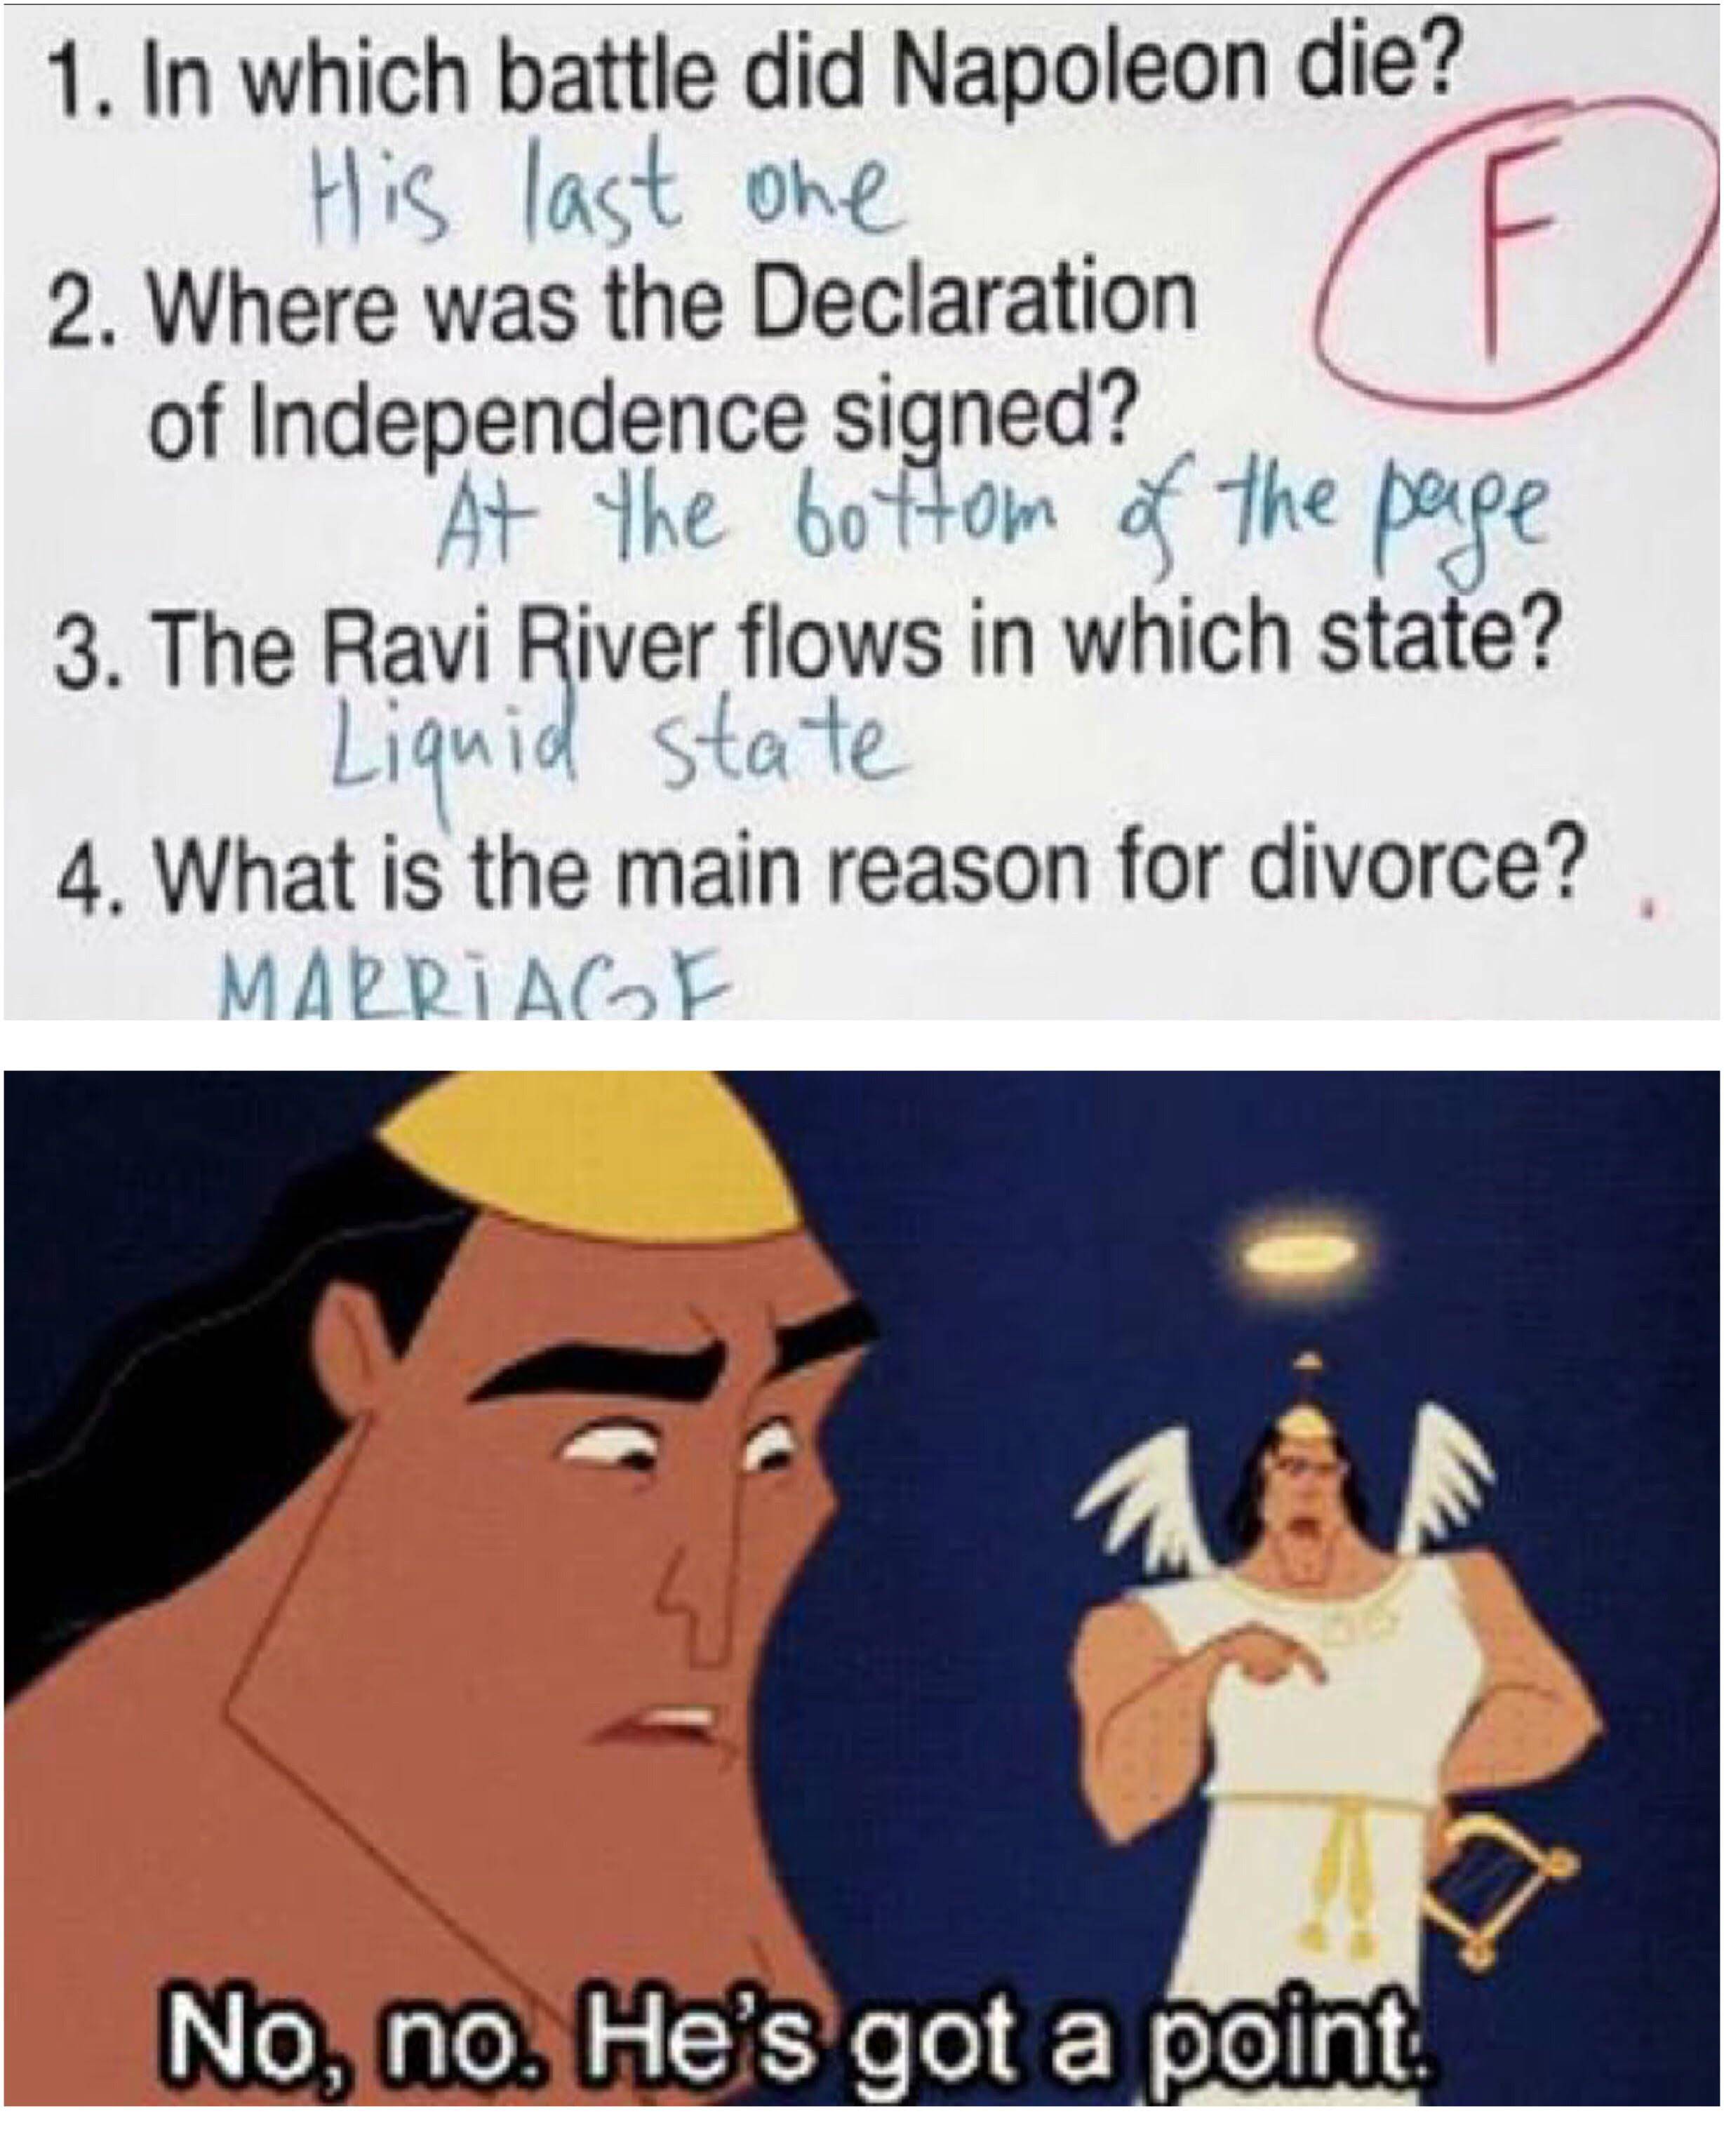 dank memes - no no he's got a point meme - G 1. In which battle did Napoleon die? His last one 2. Where was the Declaration of Independence signed? " At the bottom of the page 3. The Ravi River flows in which state? Liquid state 4. What is the main reason